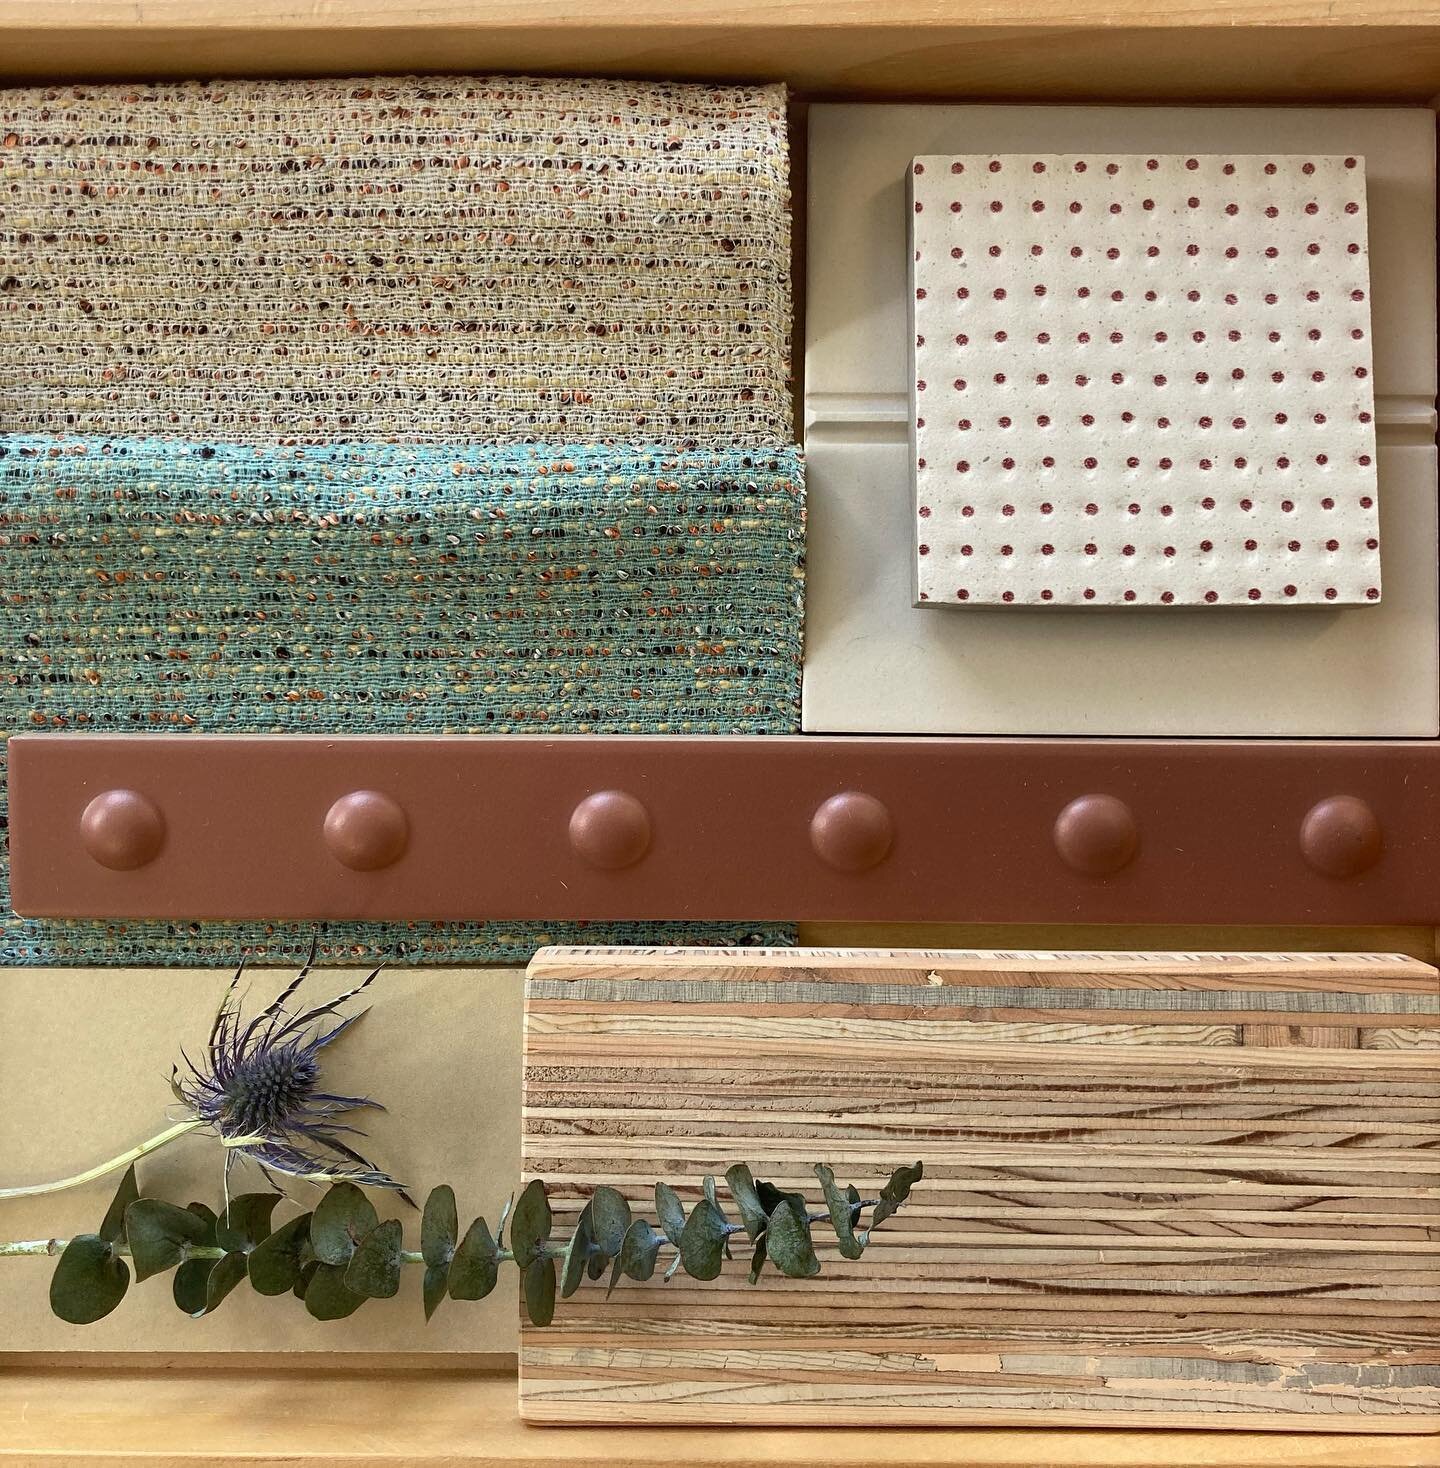 Mid day materials moment.

#materialslibrary #materialshowroom #materialsamples #flatlay  #sourcepdx